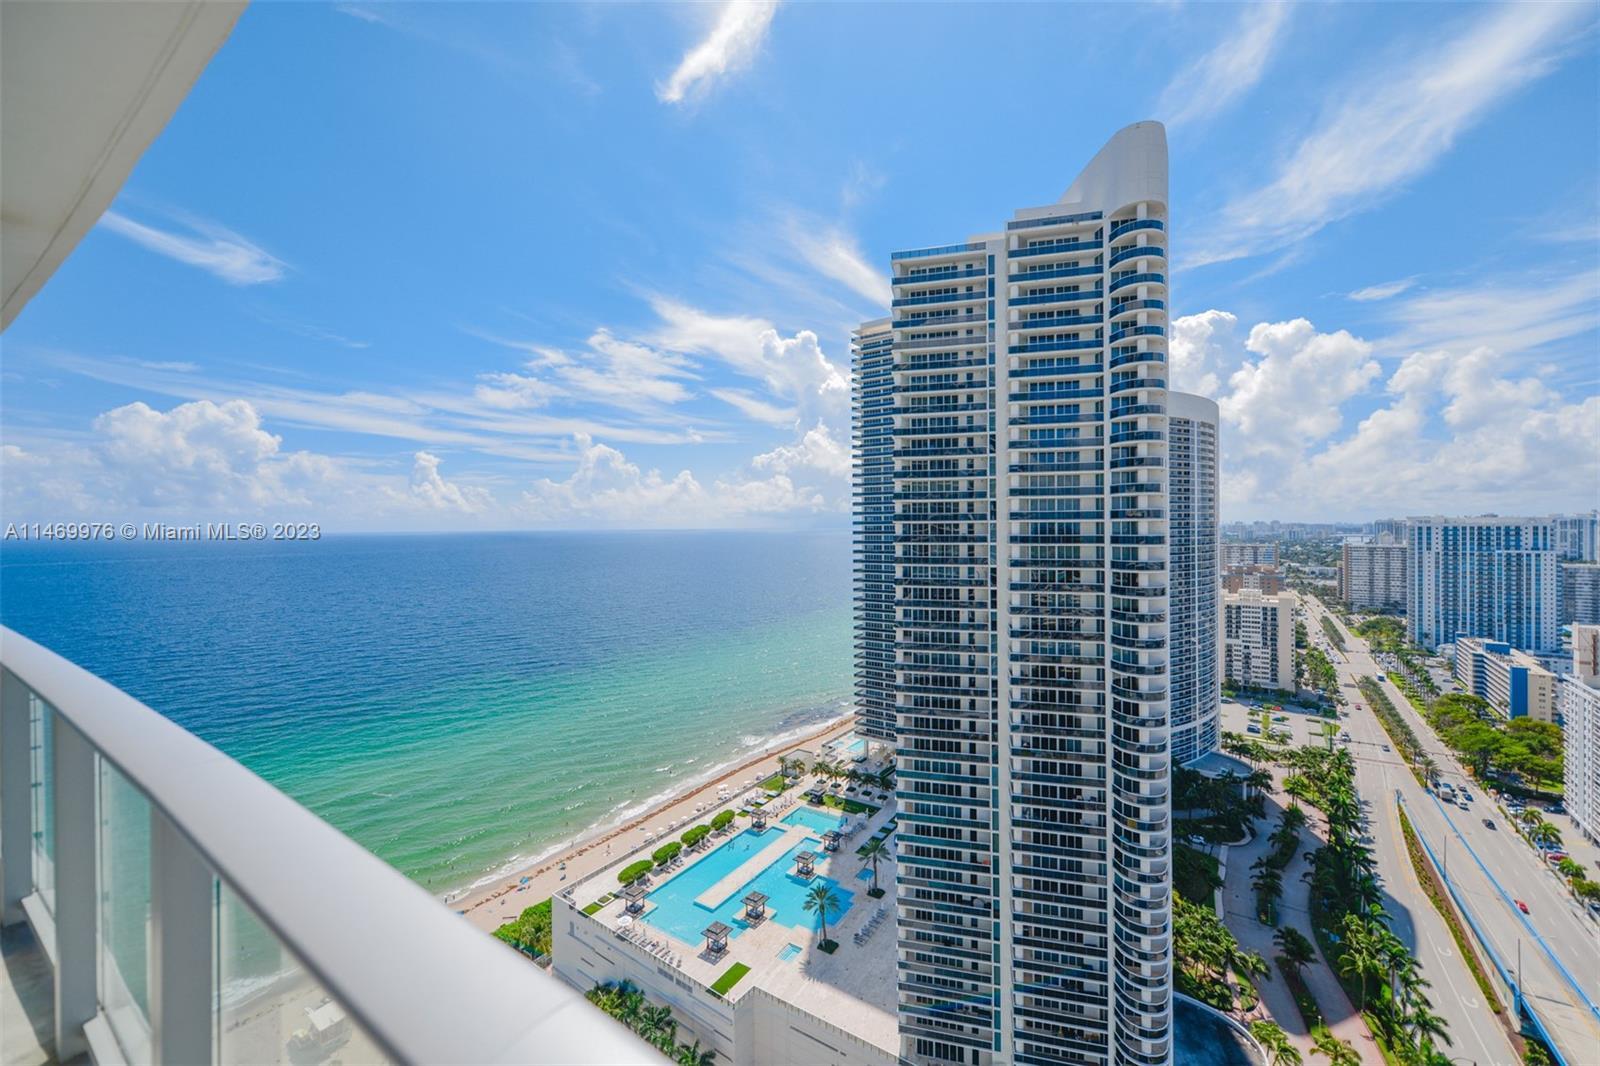 Photo of 4111 S Ocean Dr #2711 in Hollywood, FL